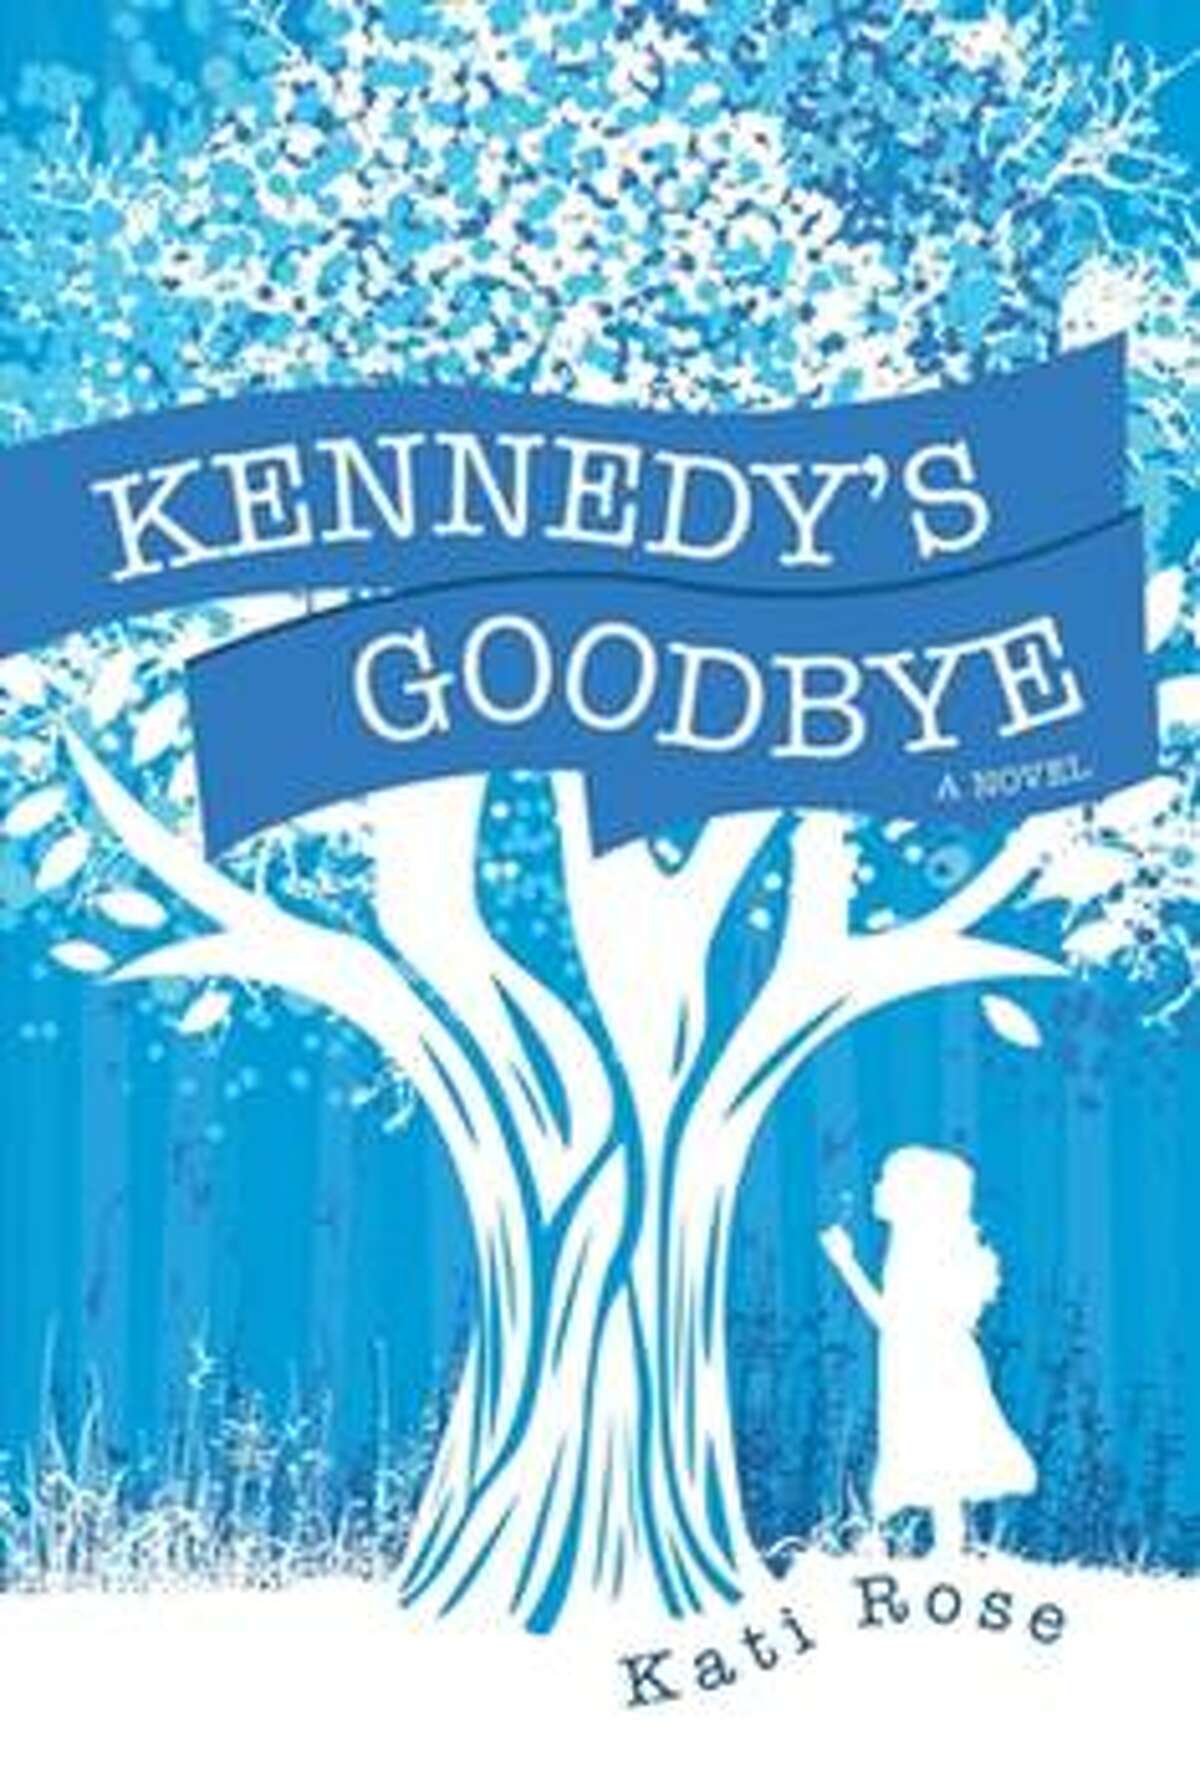 "Kennedy's Goodbye" by Katie Rose